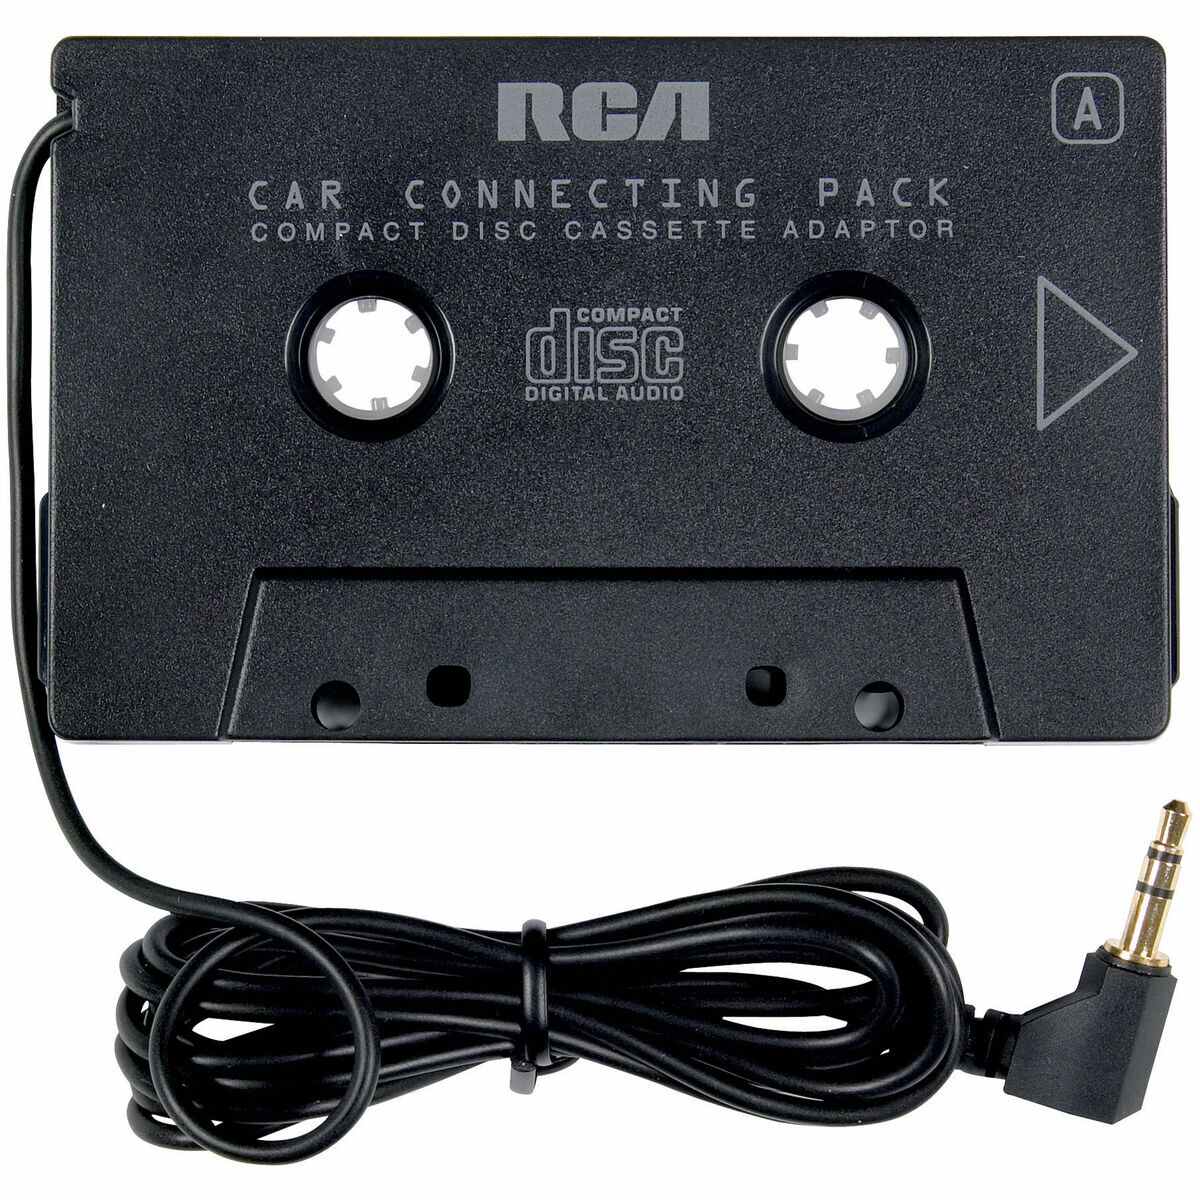 Where Can I Get A Cassette Adapter